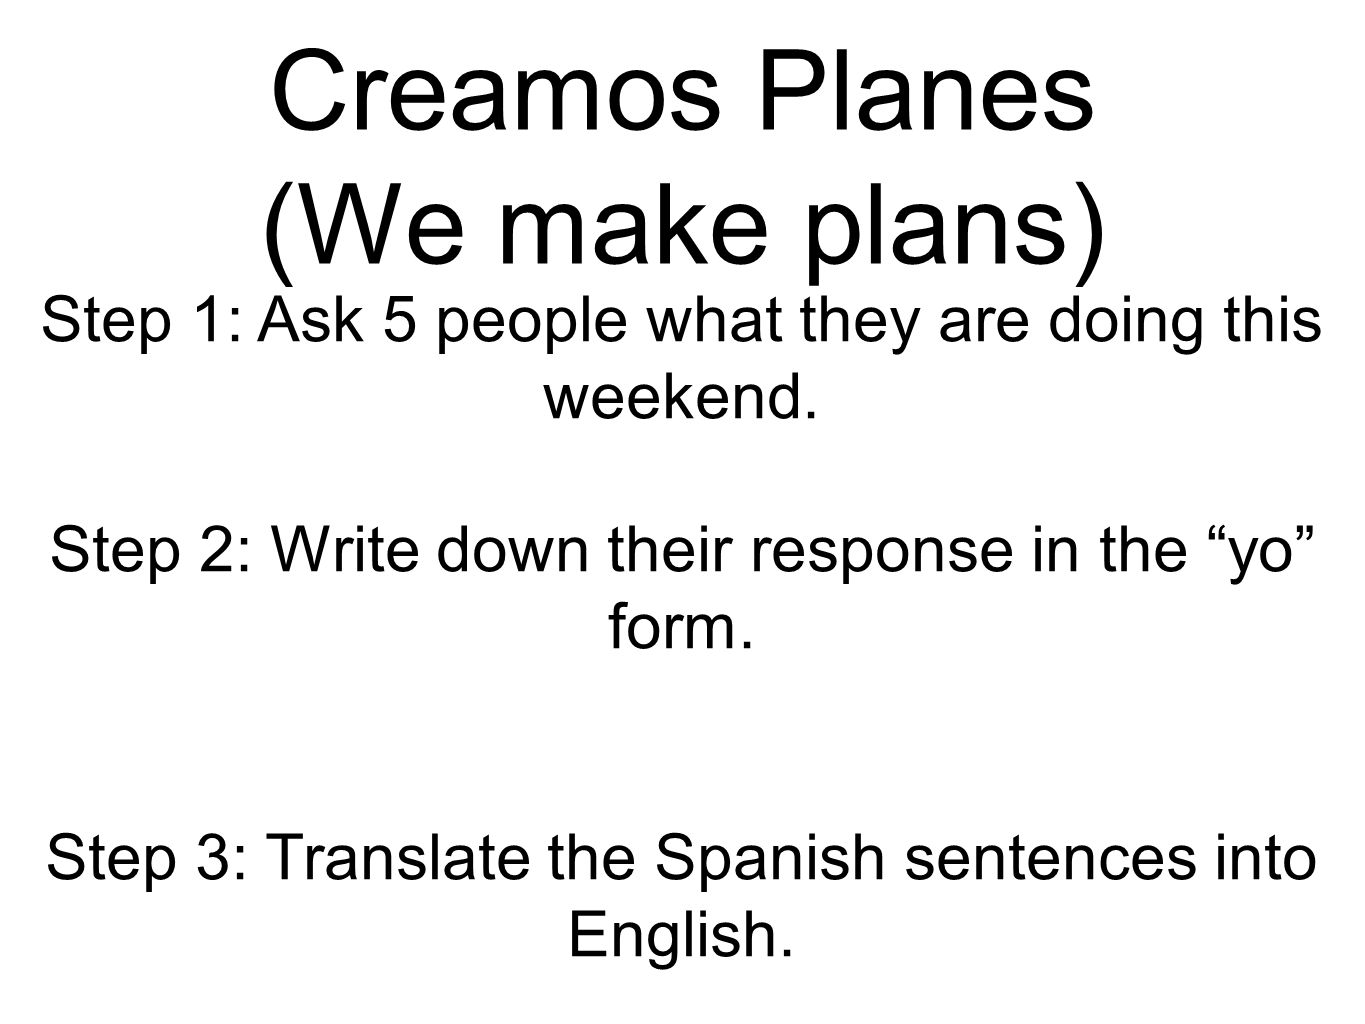 Creamos Planes (We make plans) Step 1: Ask 5 people what they are doing this weekend.